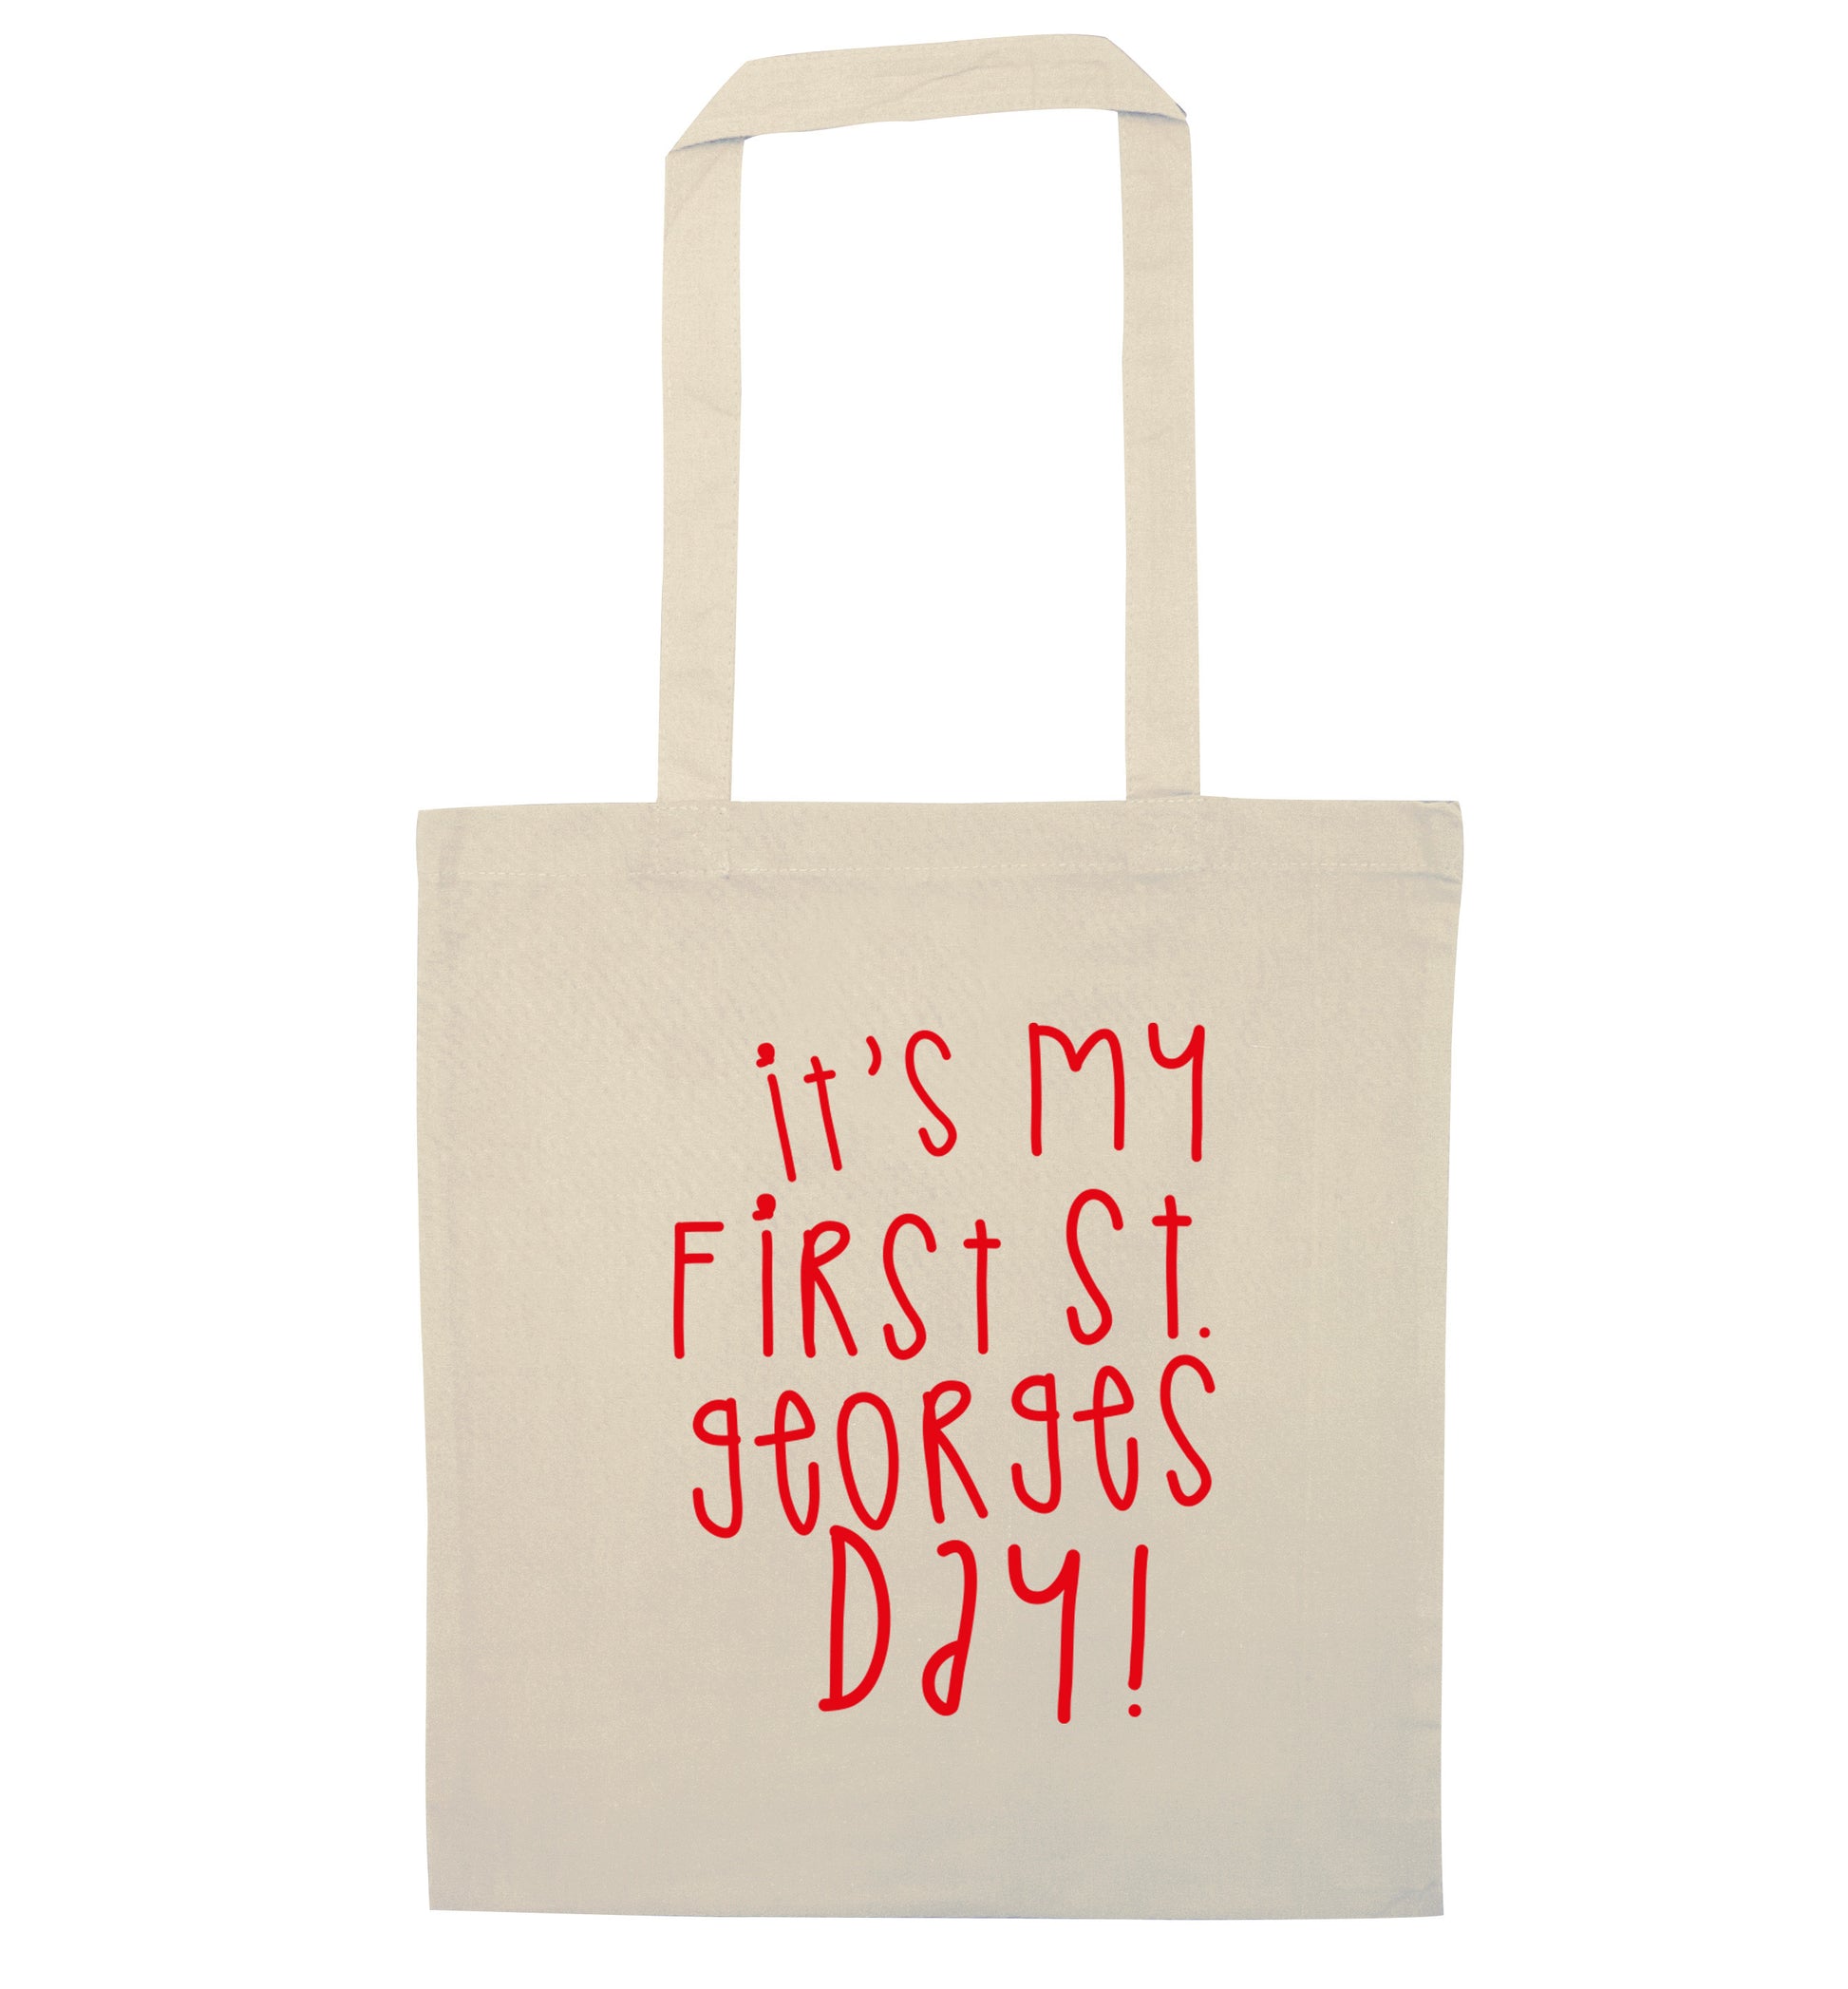 It's my first St Georges day natural tote bag